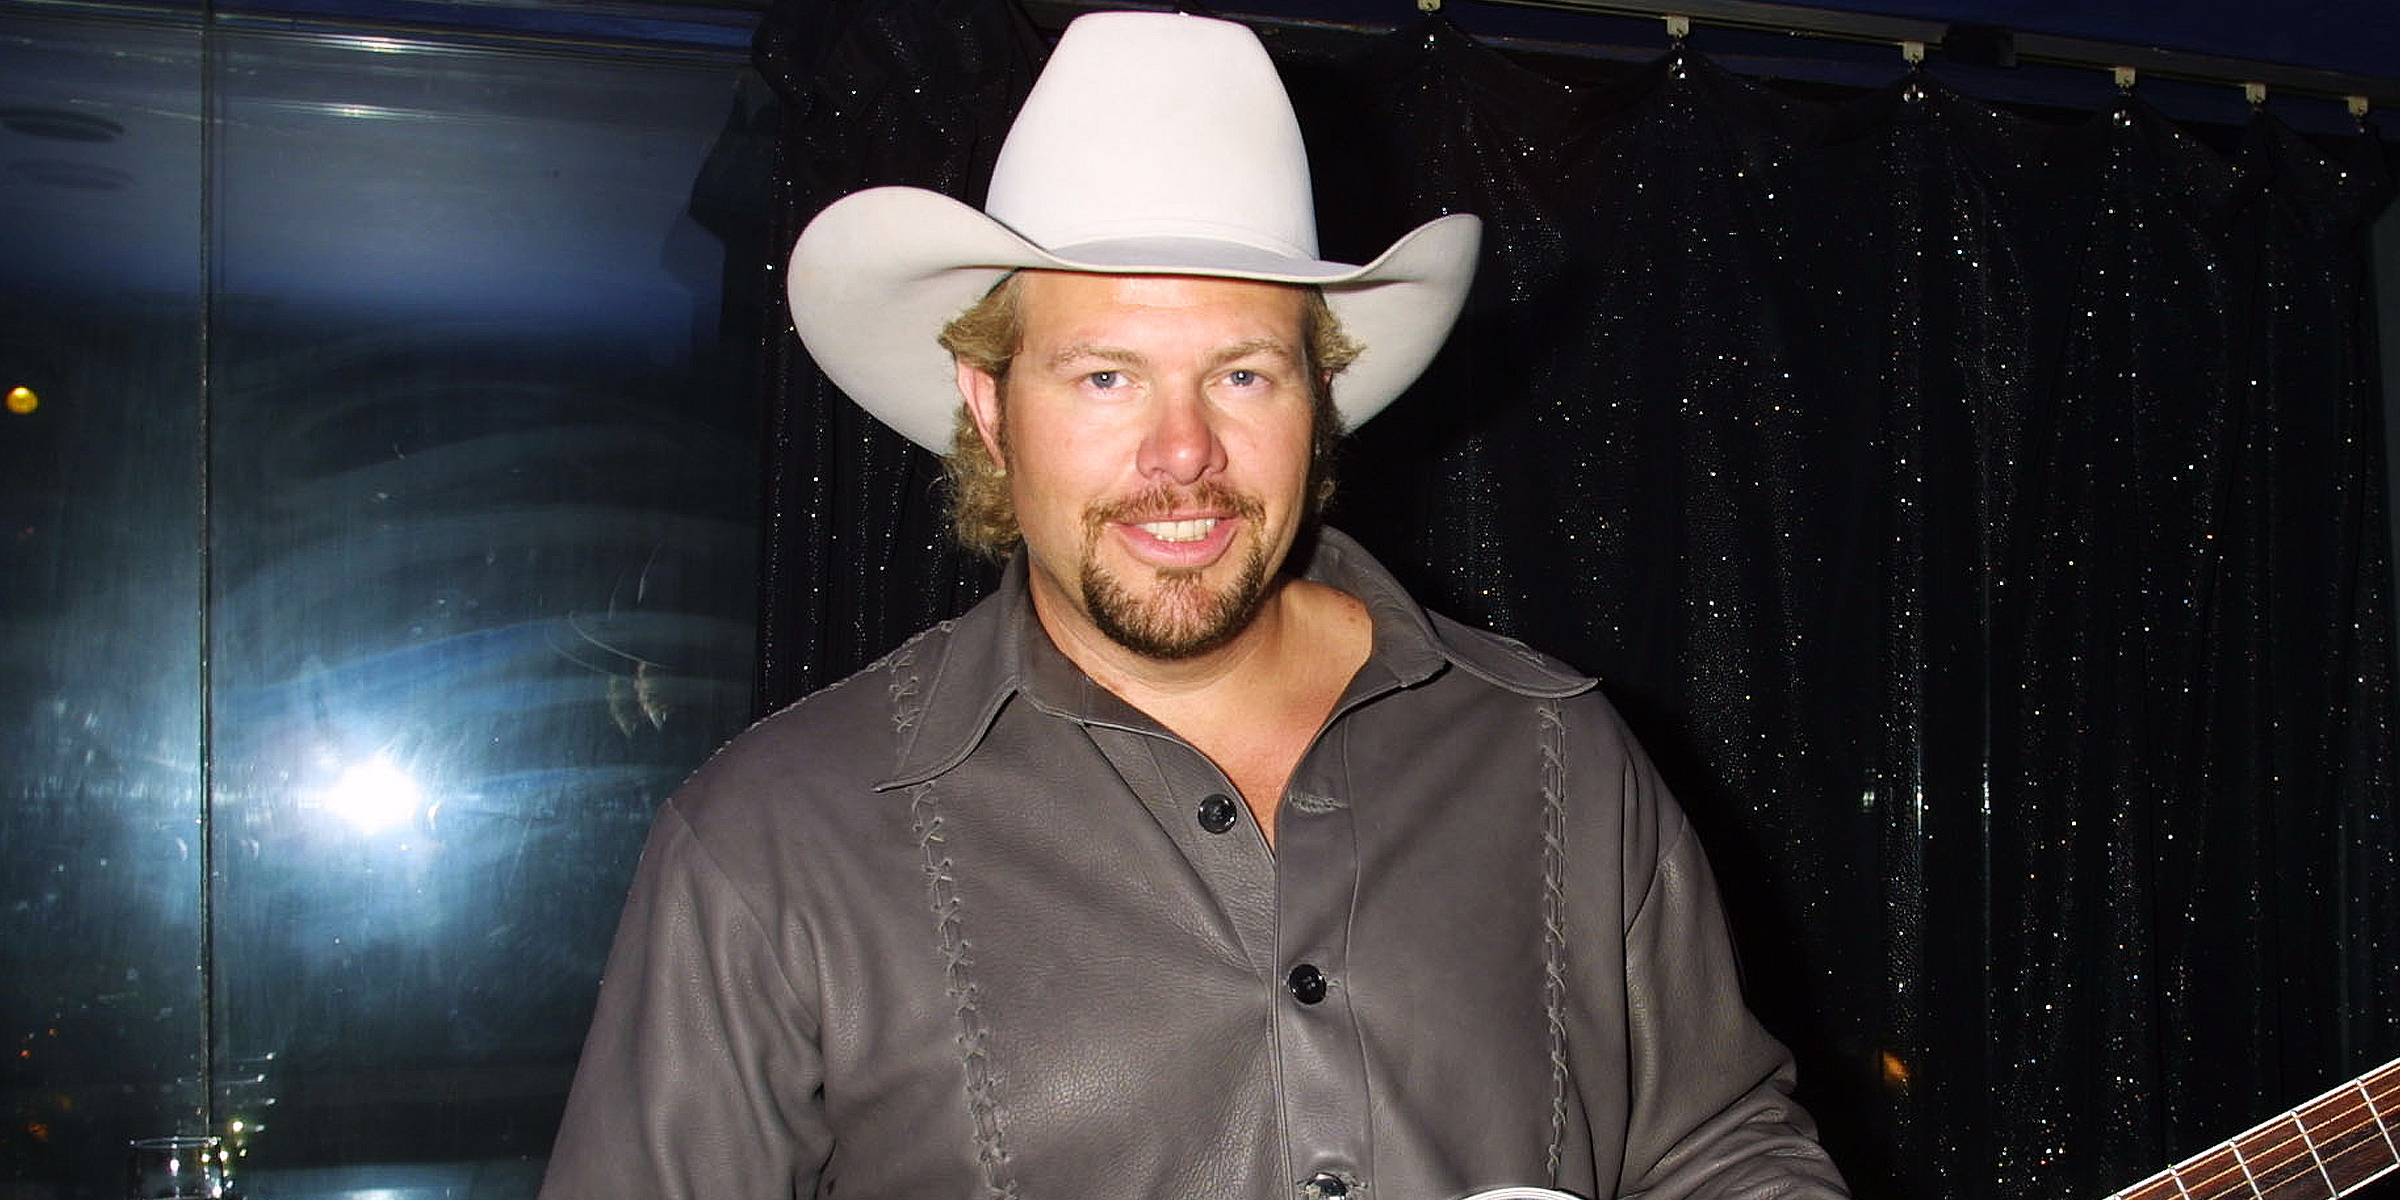 Toby Keith | Source: Getty Images